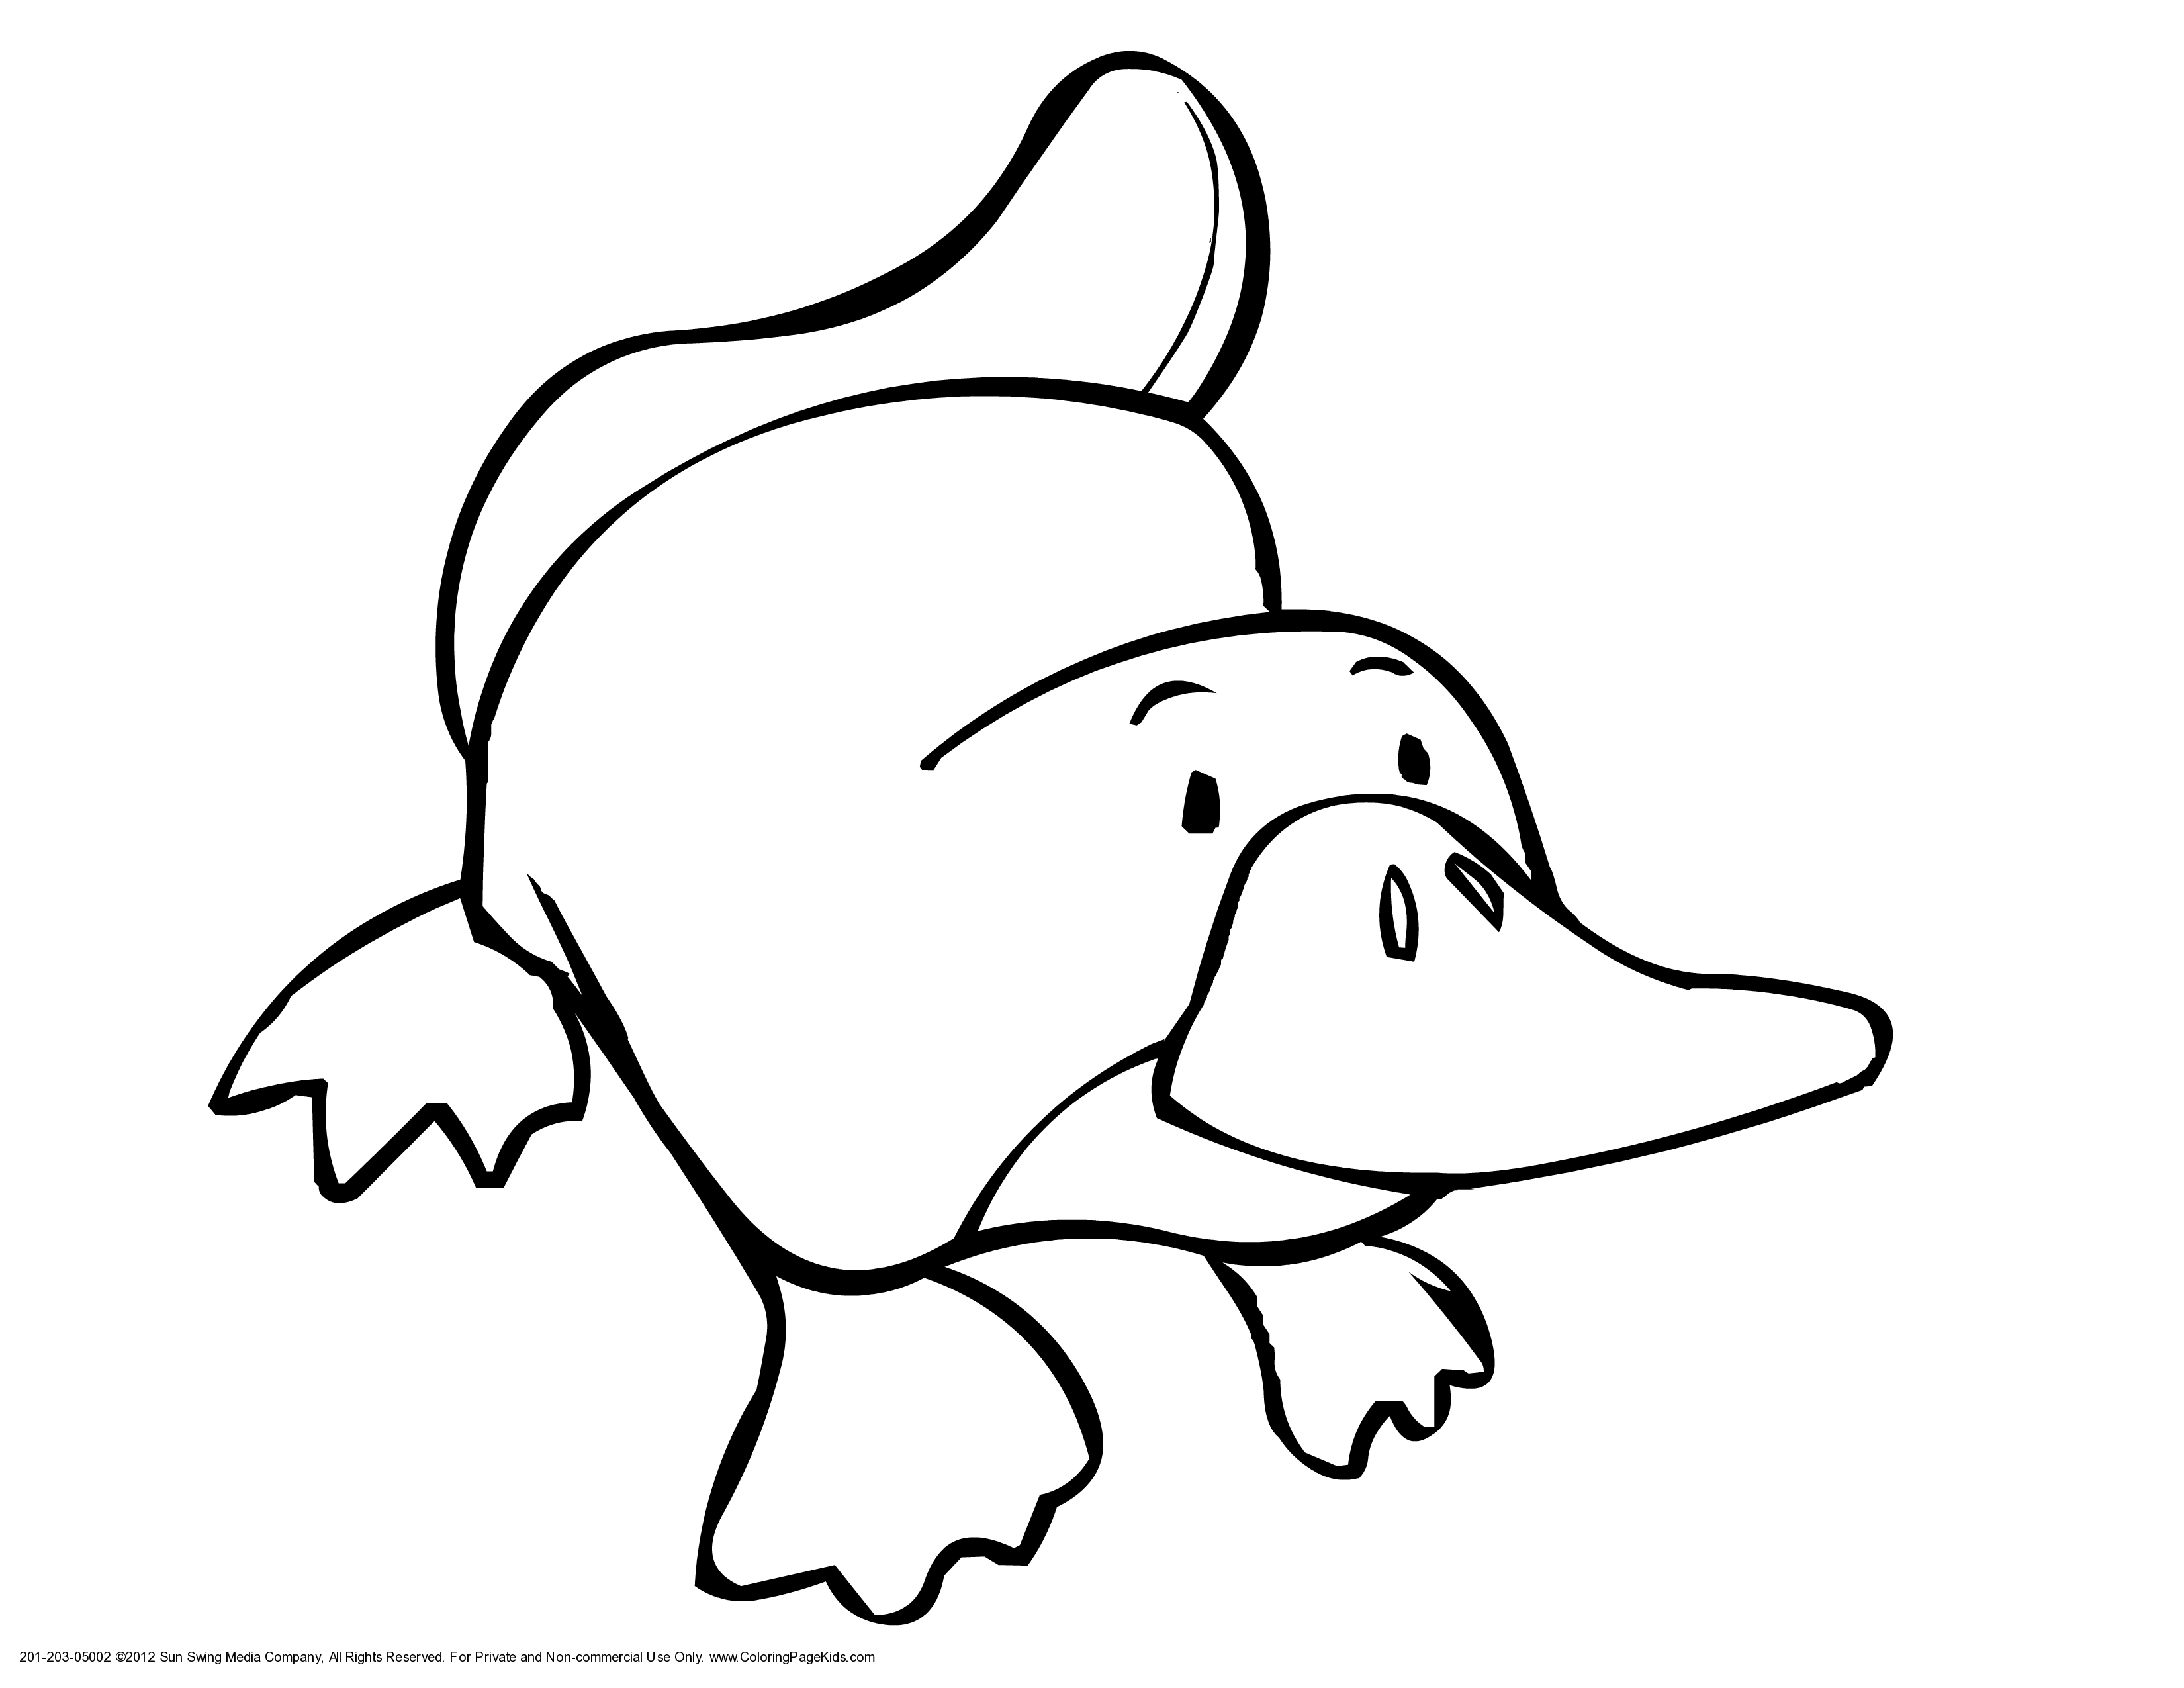 Platypus Coloring Pages | Clipart Panda - Free Clipart Images